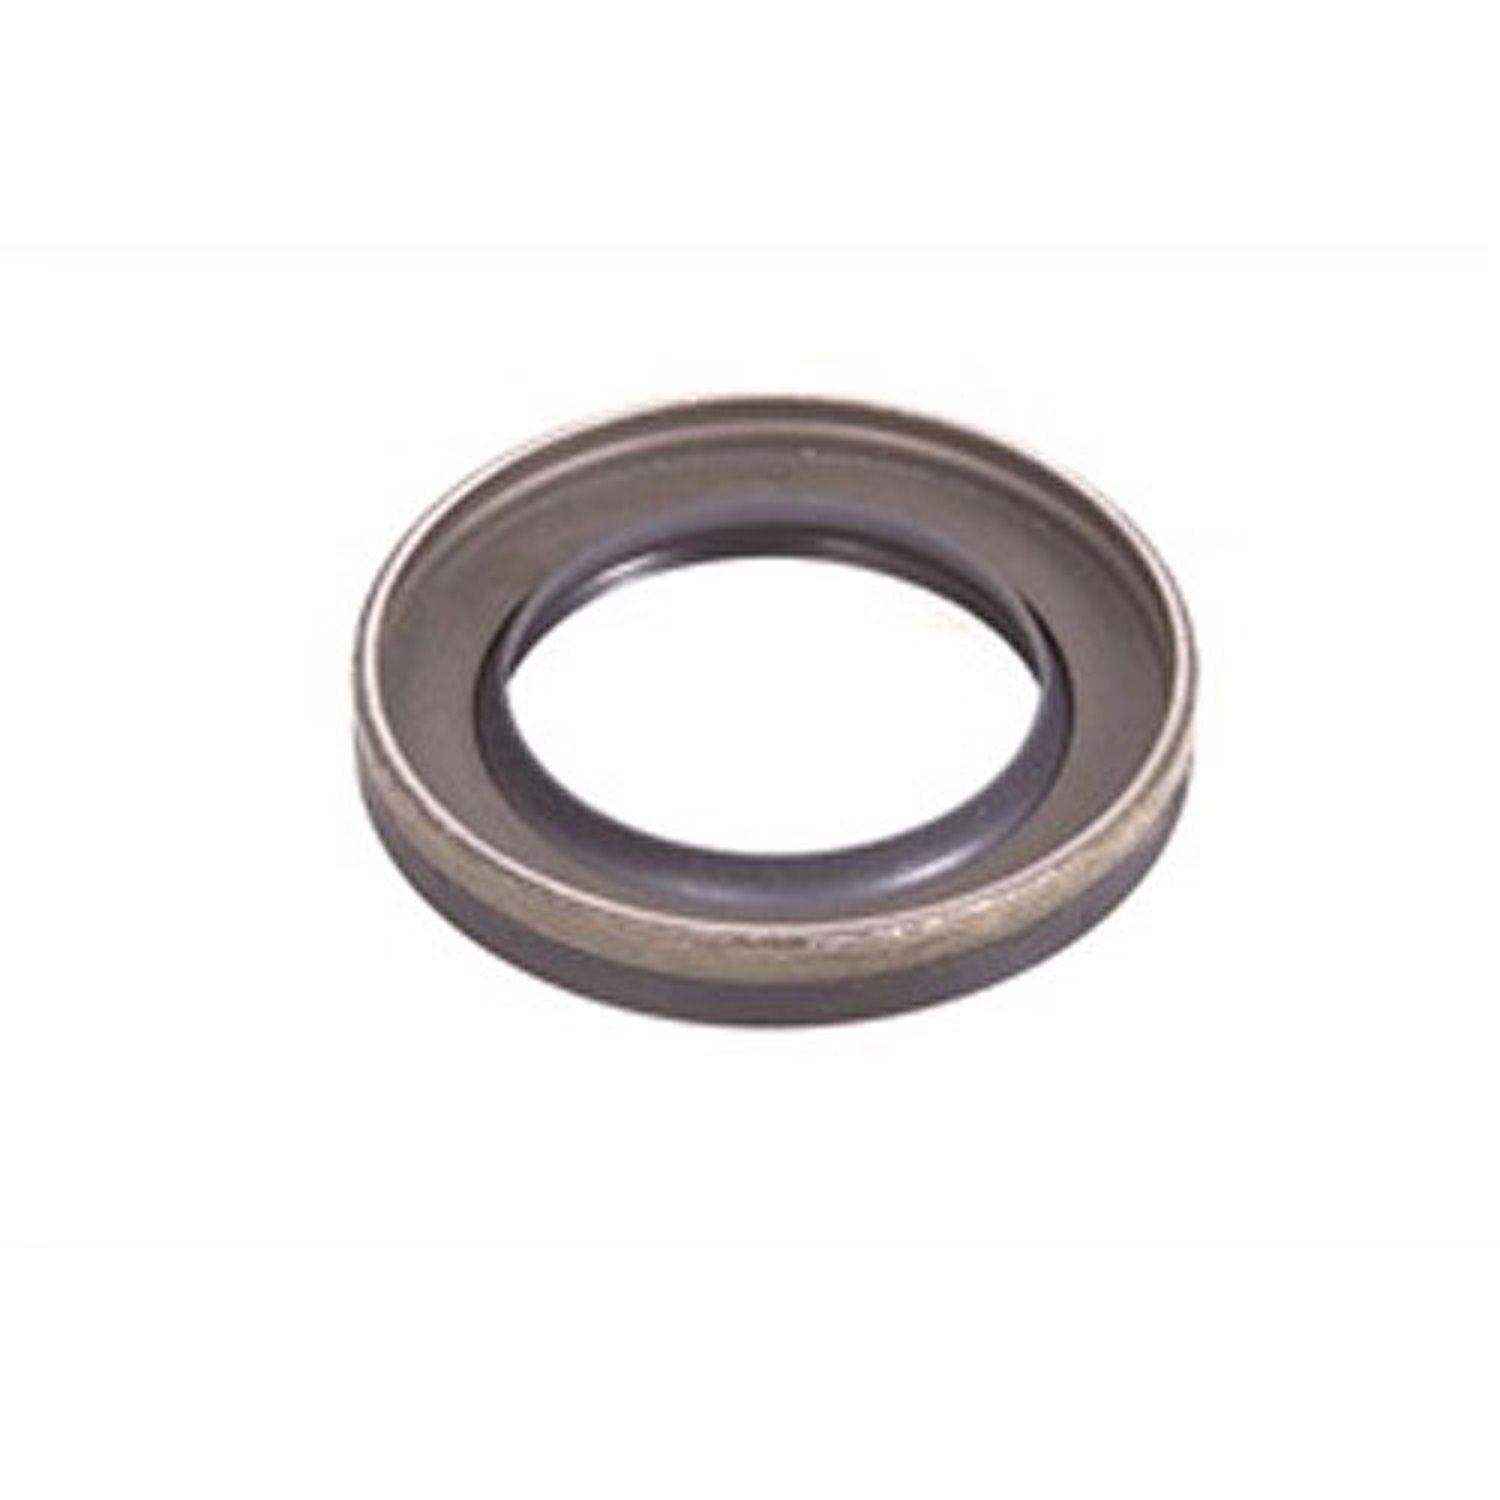 This crankshaft oil seal from Omix-ADA fits the